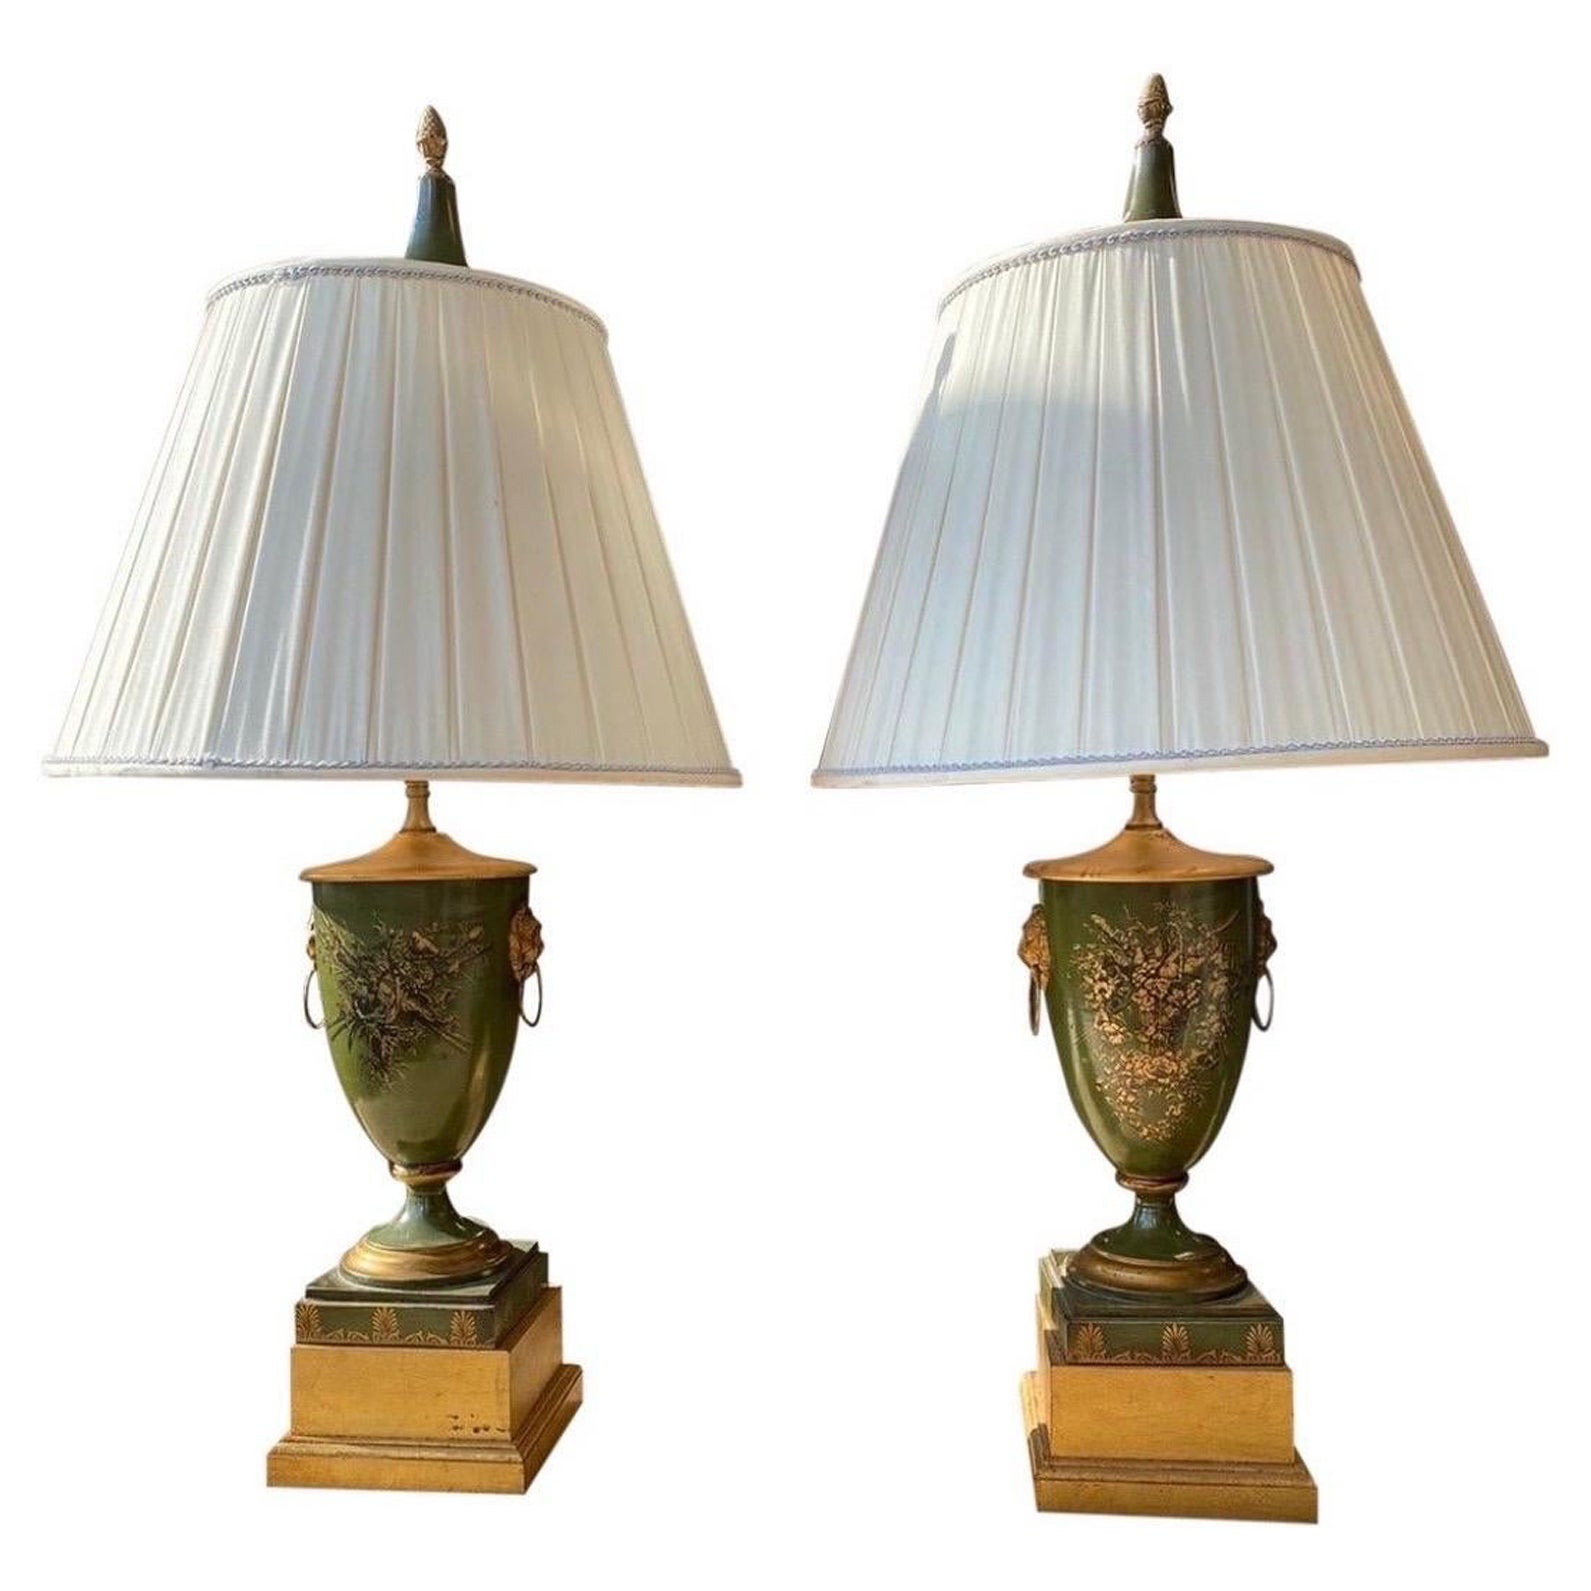 Vintage French Tole Hunting Urns Converted Into Table Lamps - a Pair